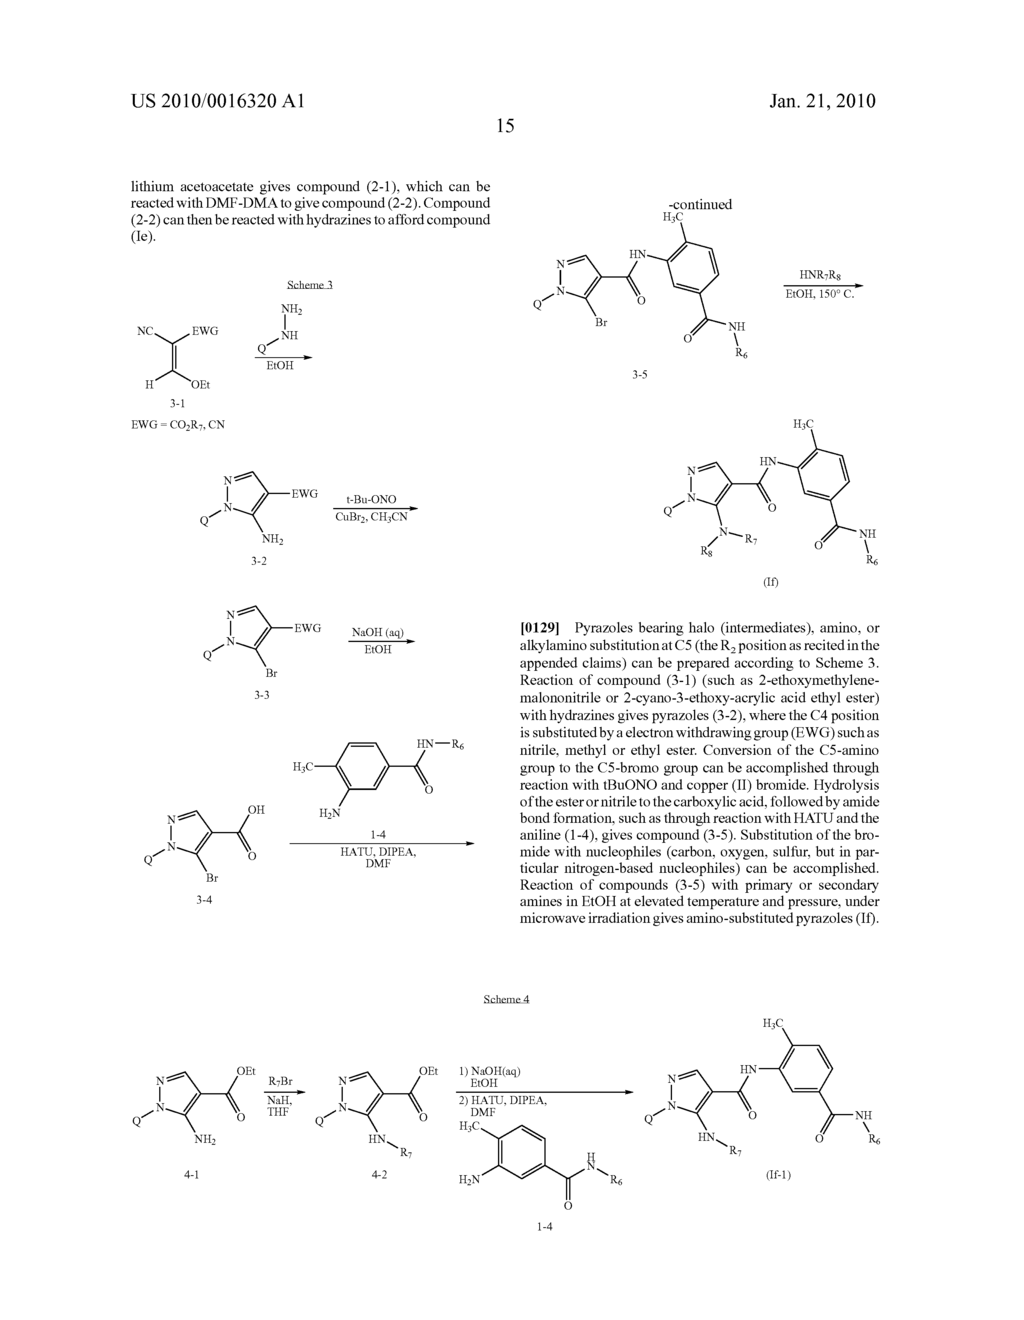 ARYL-SUBSTITUTED PYRAZOLE-AMIDE COMPOUNDS USEFUL AS KINASE INHIBITORS - diagram, schematic, and image 16